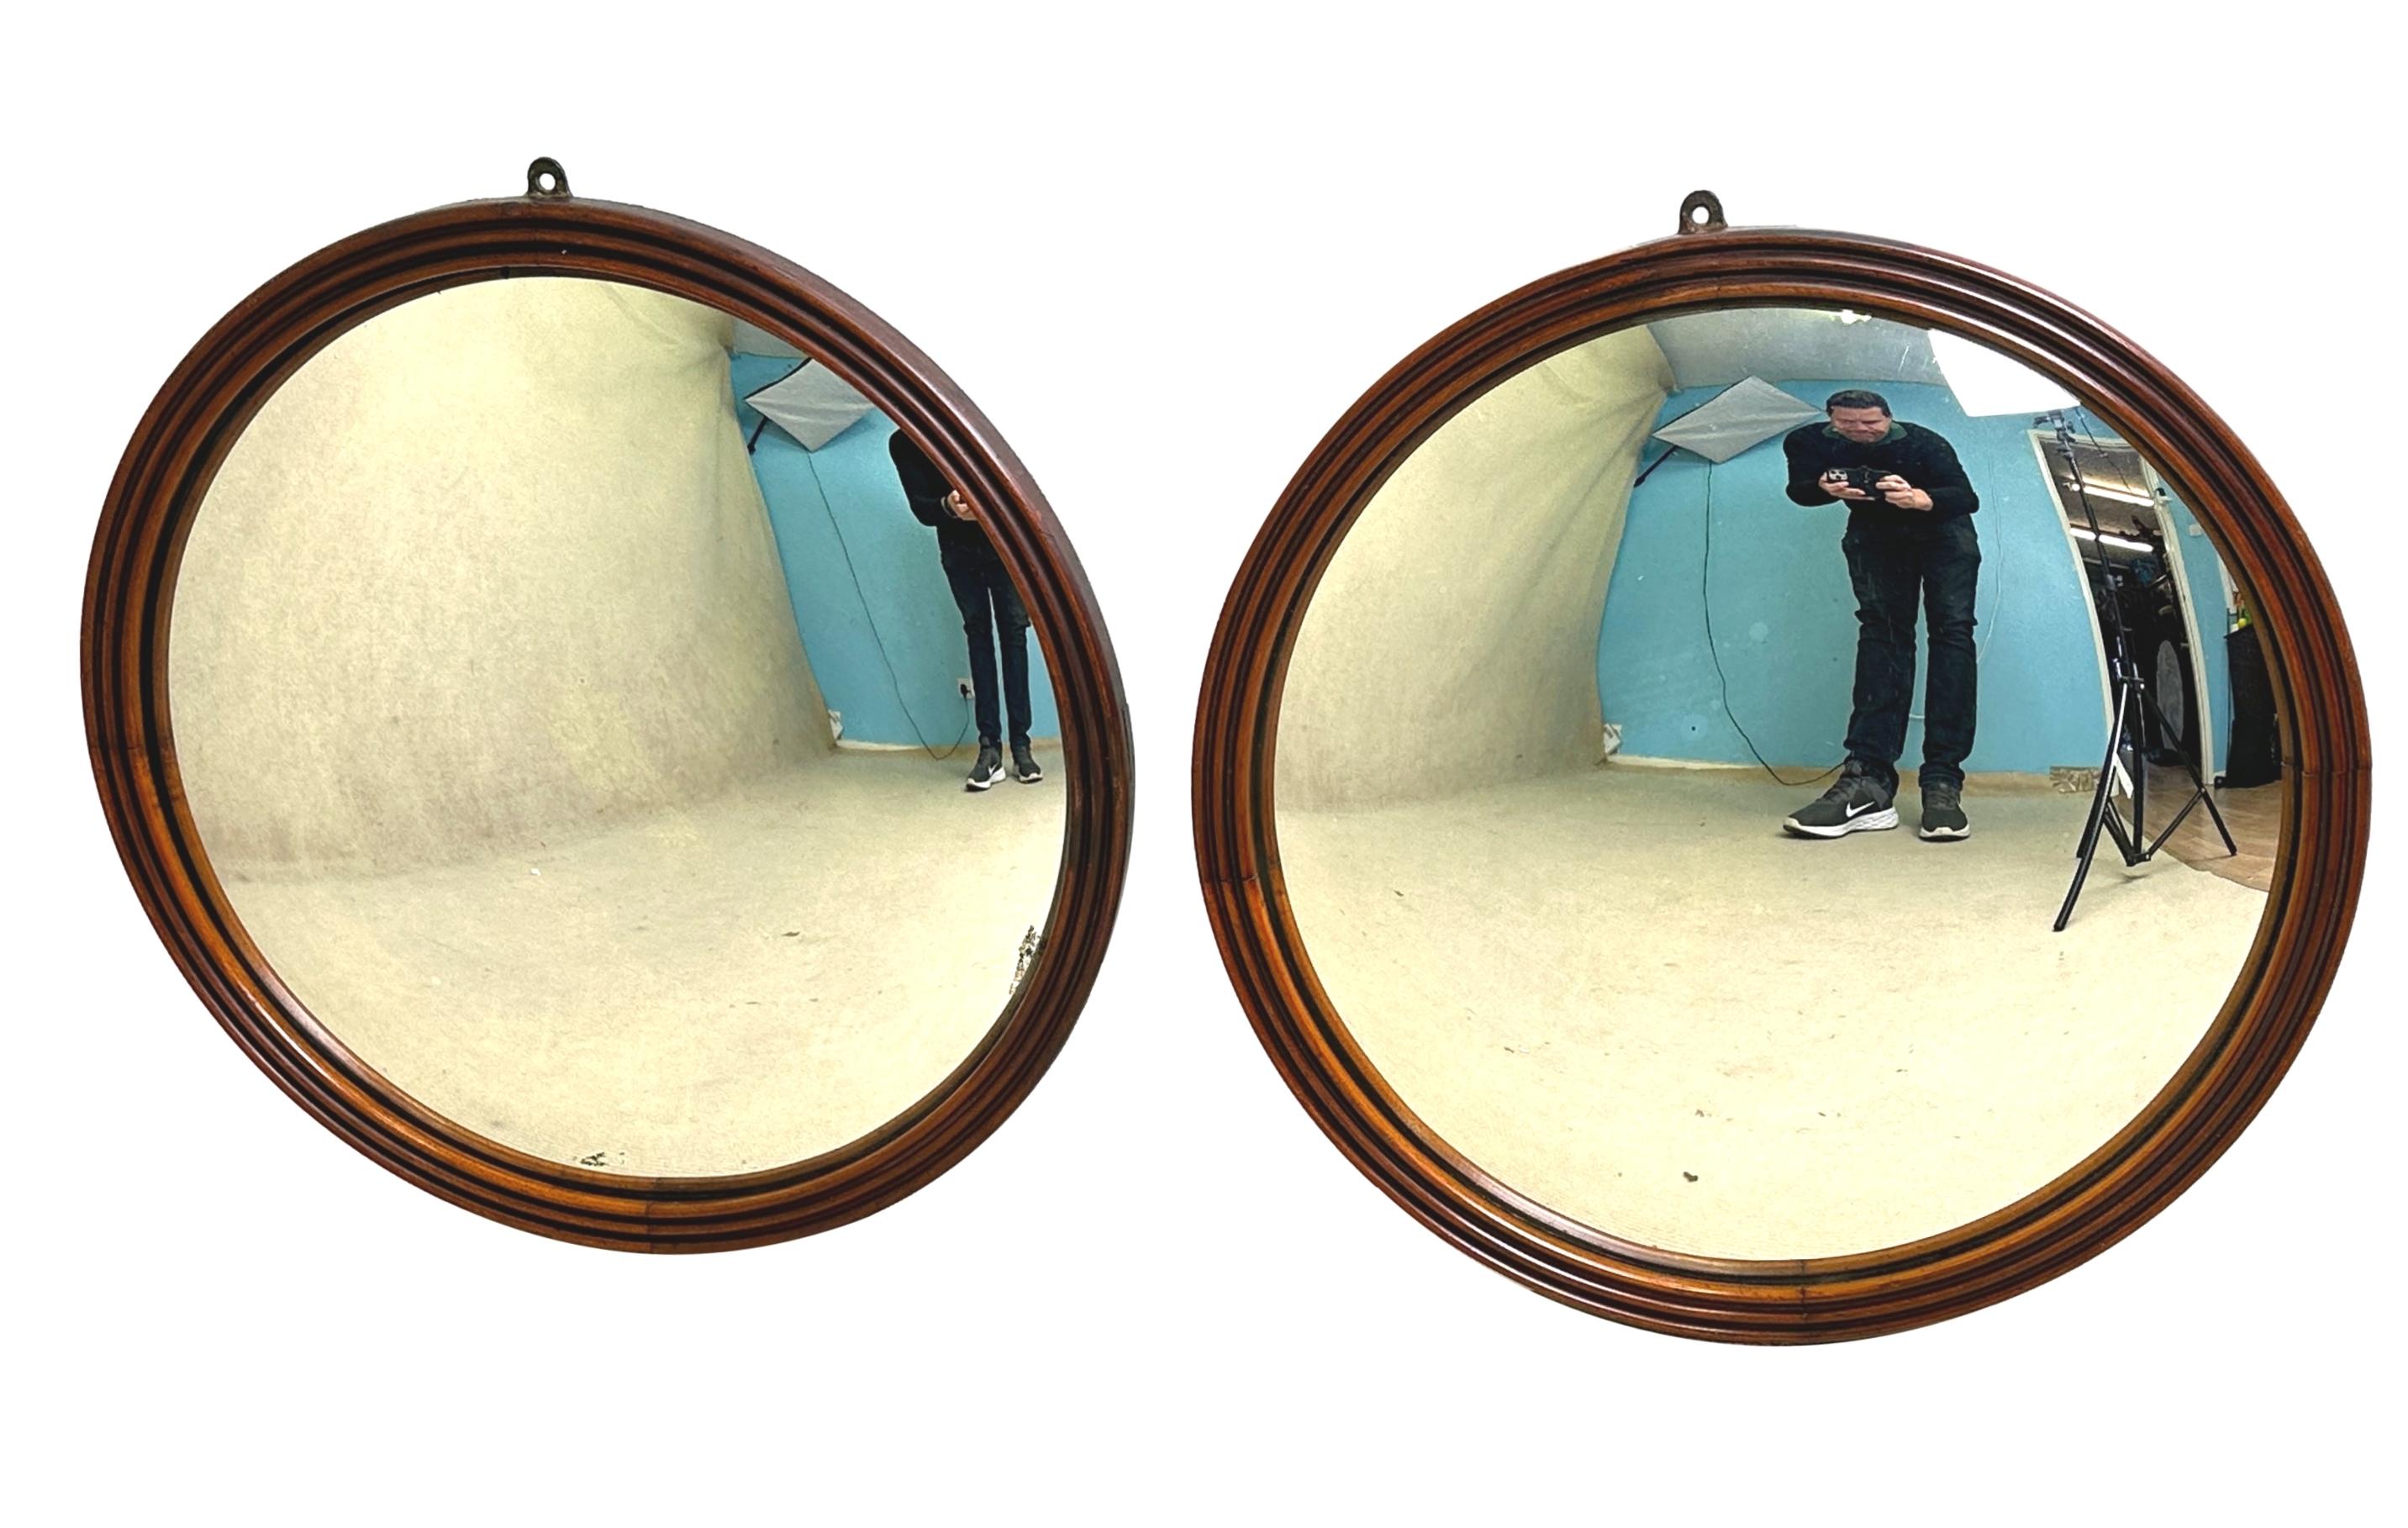 A Very Good Quality And Rarely Found Pair Of Mid 19th Century Circular Mirrors, Unusually Having Attractive Mahogany Frames With Elegant Reeded Decoration, Enclosing Original Convex Mirror Plates.


The original purpose of convex mirrors was to